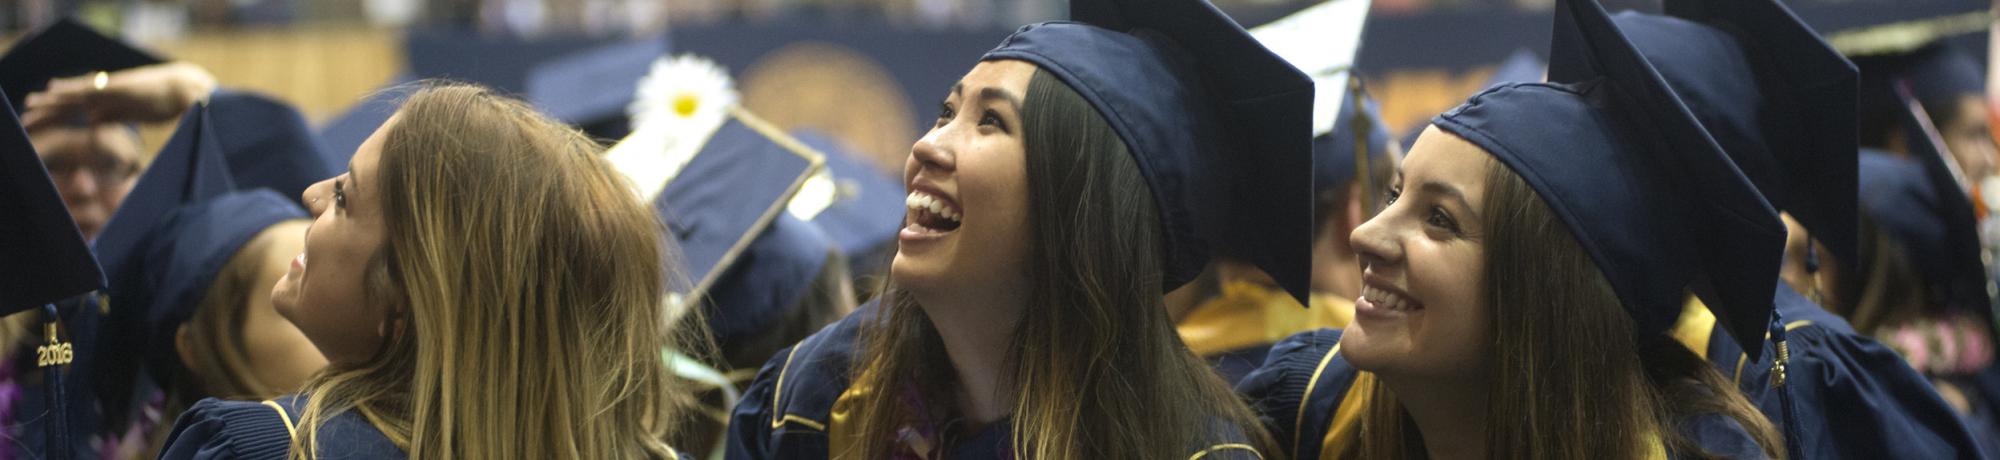 Students call to friends as they walk into the Pavilion during the commencement on Friday June 10, 2016 at UC Davis.